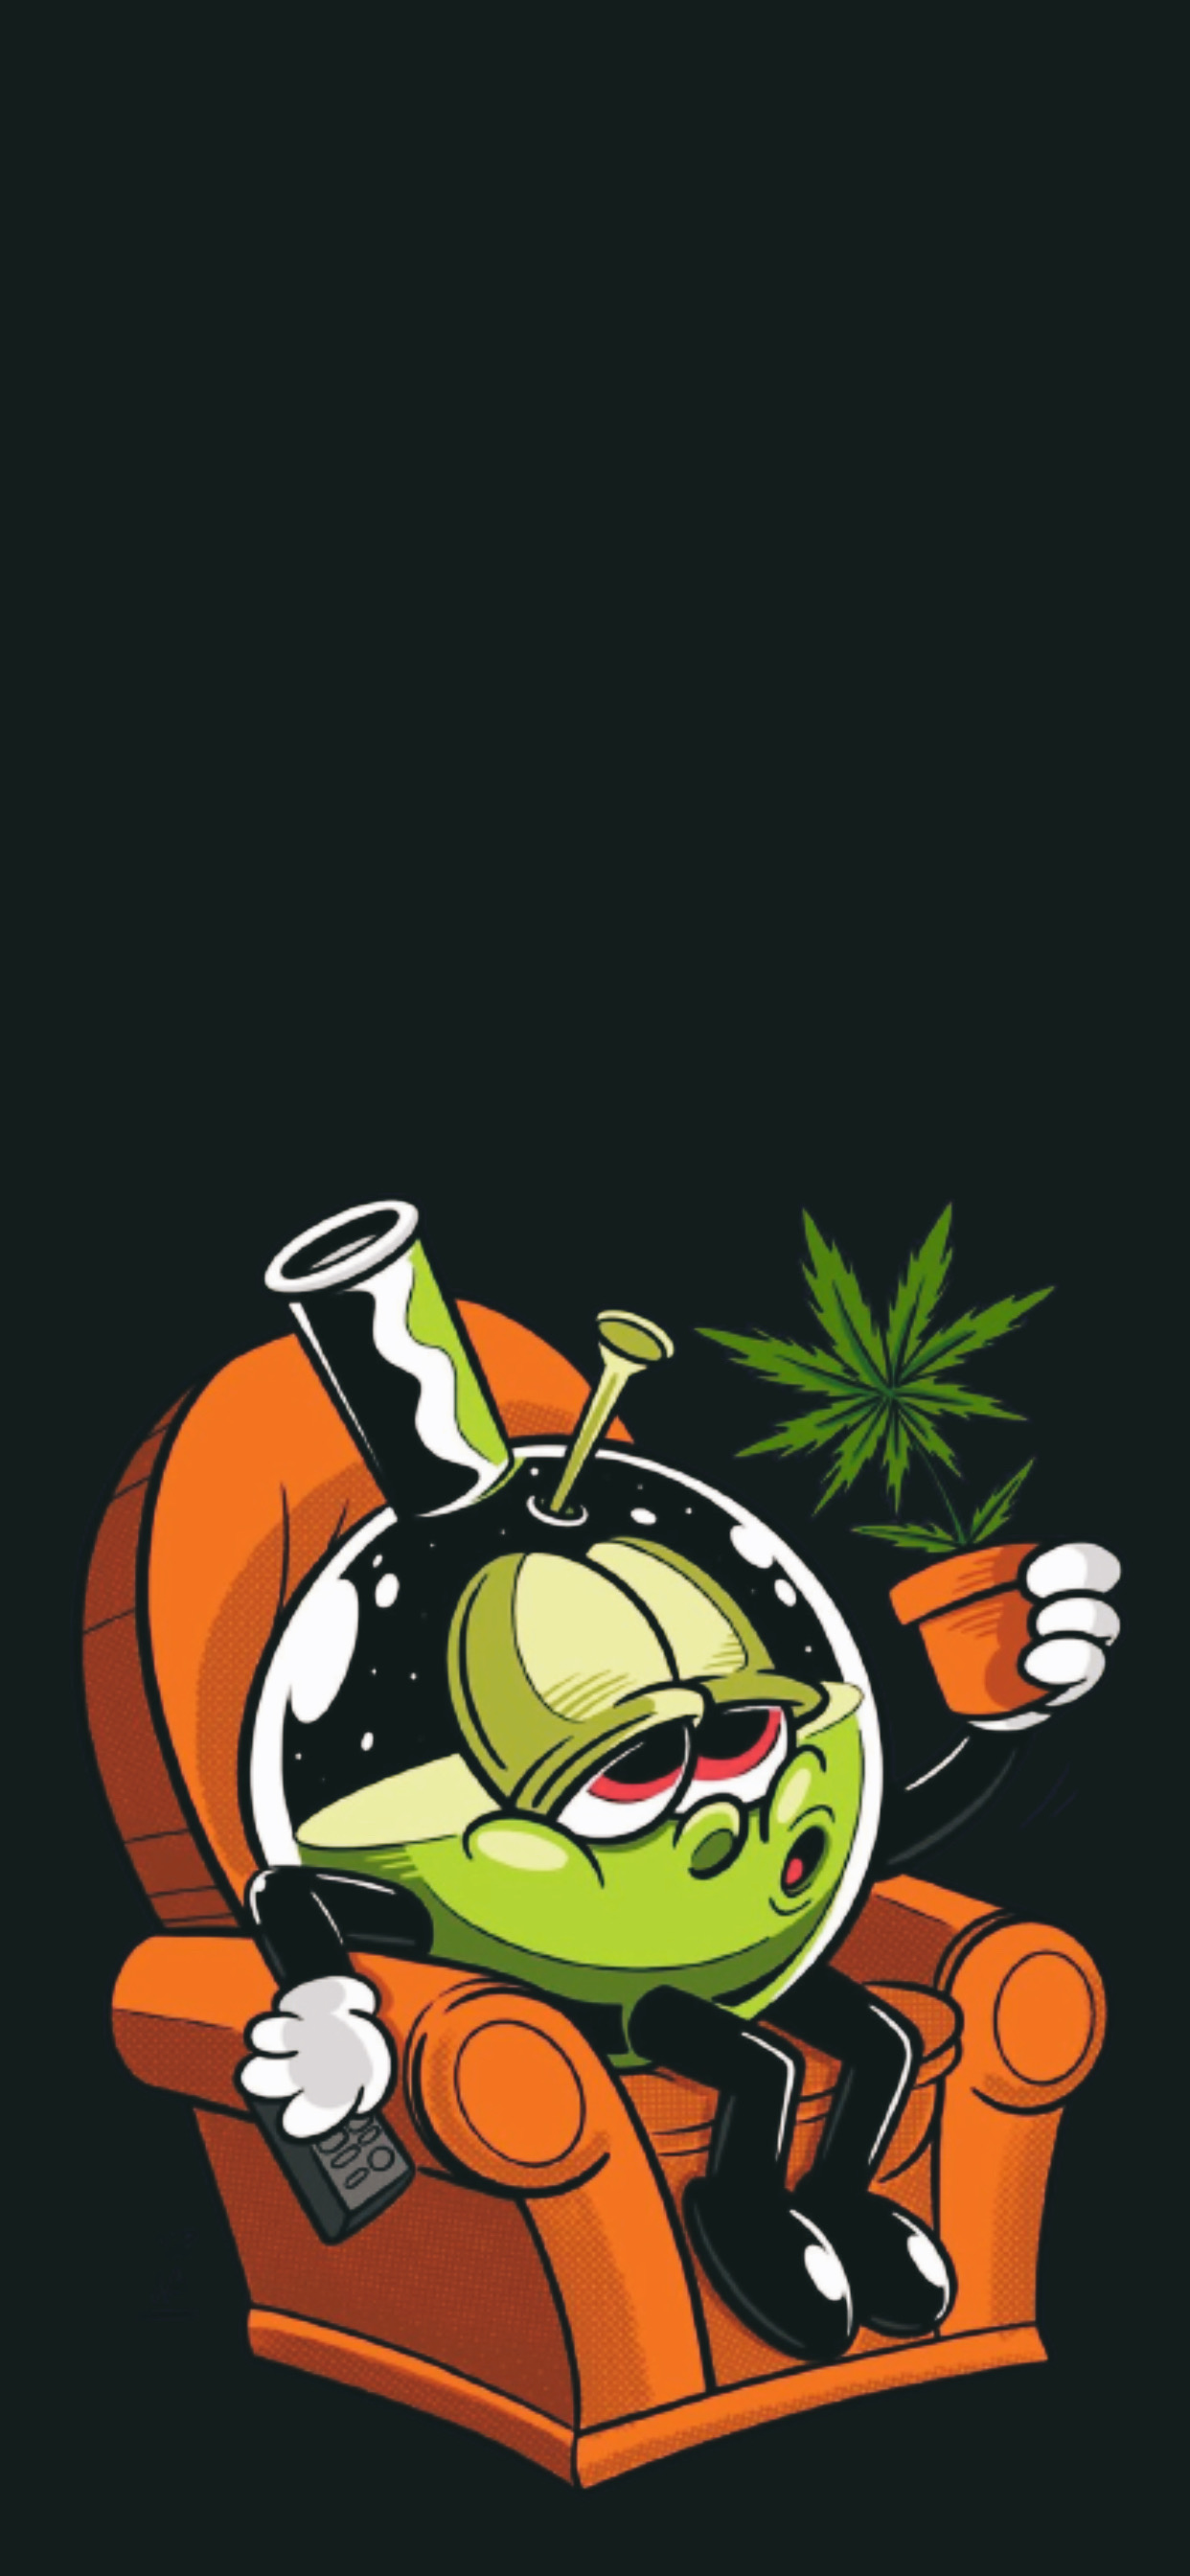 Weed For Android Wallpapers